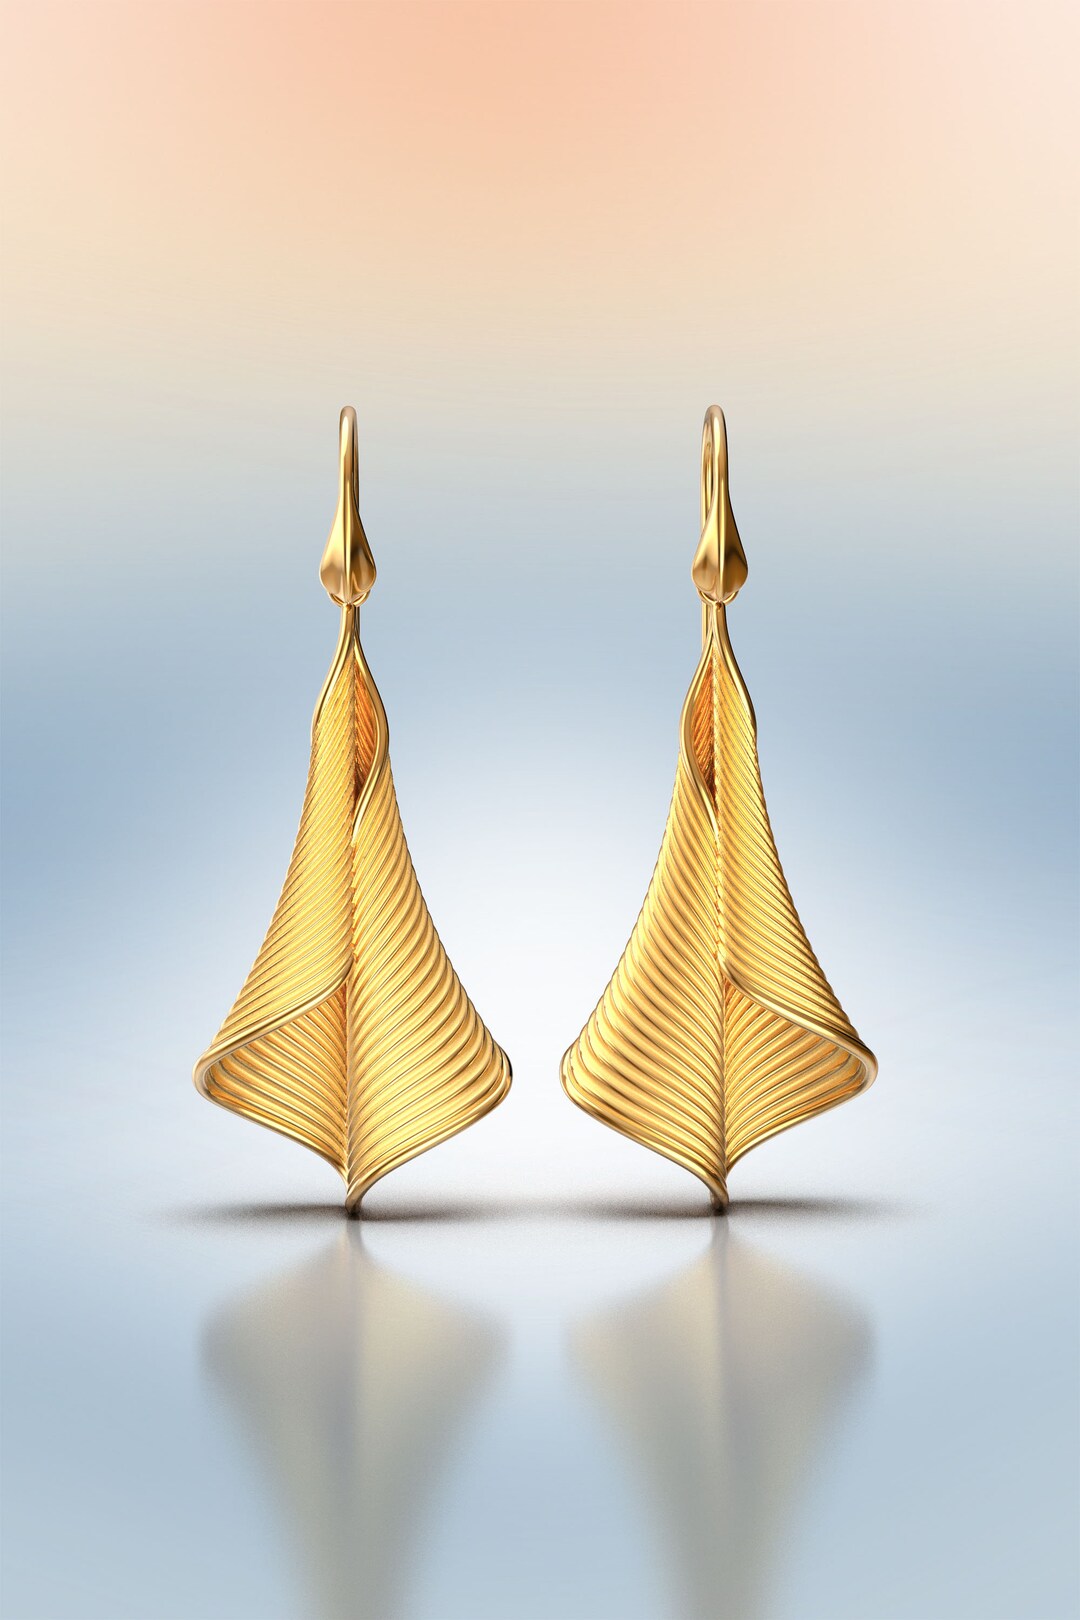 Drop Earrings in Solid Gold Available in 18k or 14k Real - Etsy UK